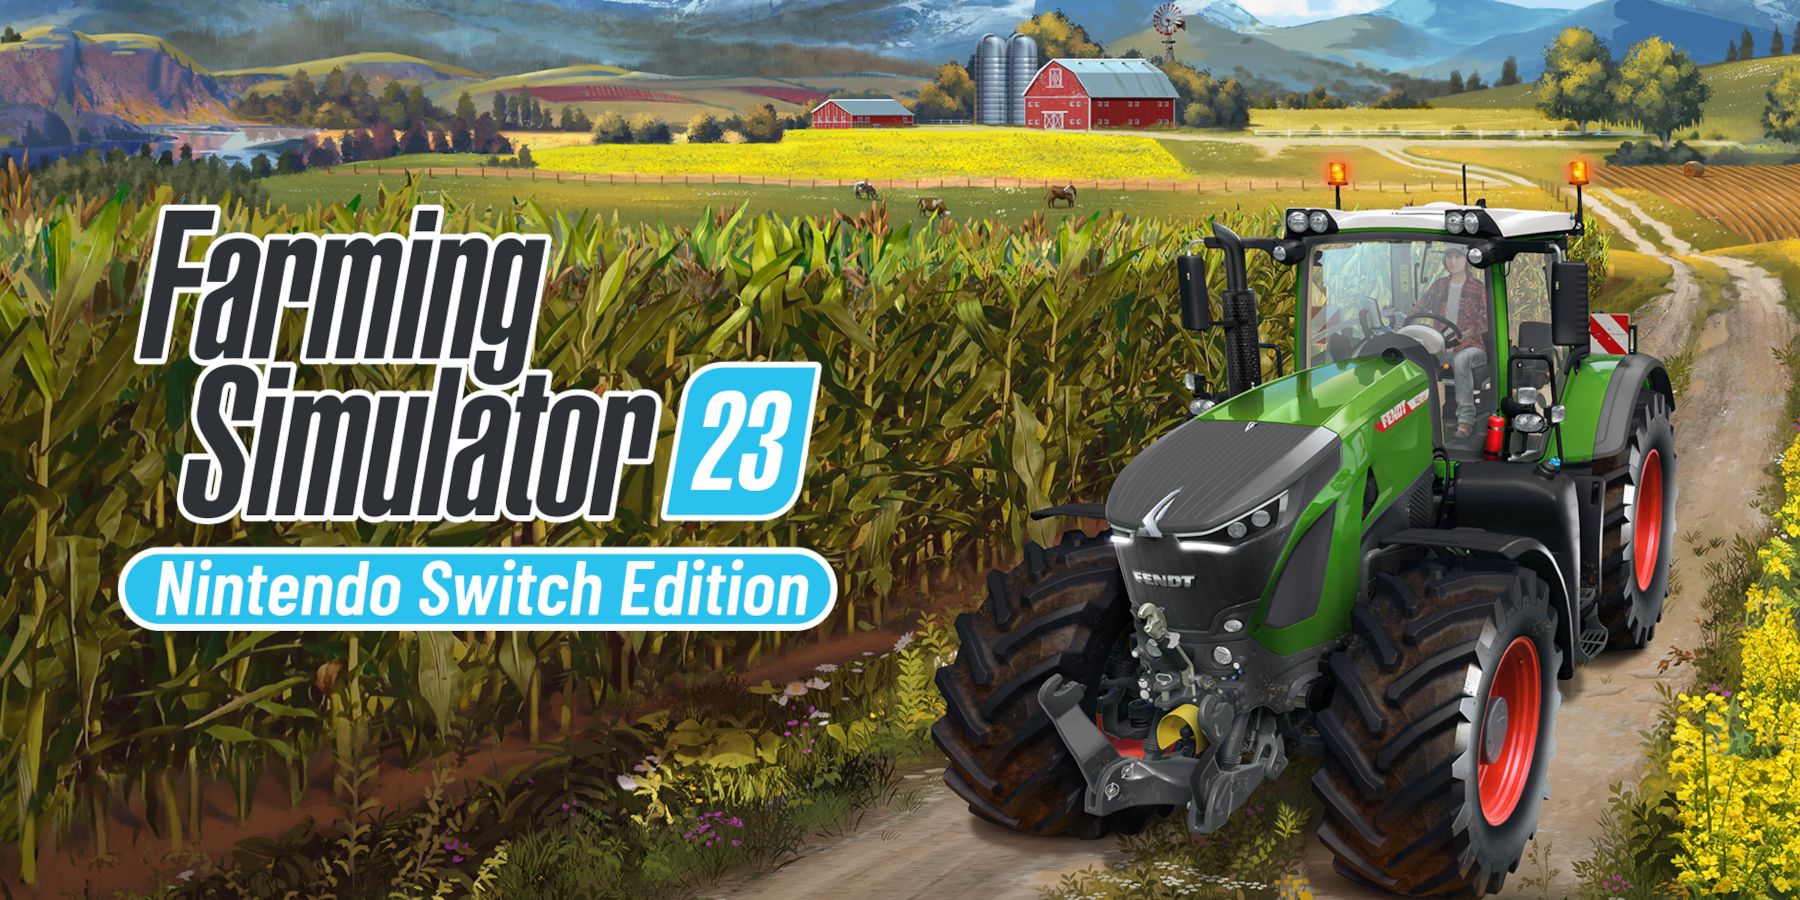 Farming Simulator 23 artwork. A tractor is driving down a track next to a field of crops.